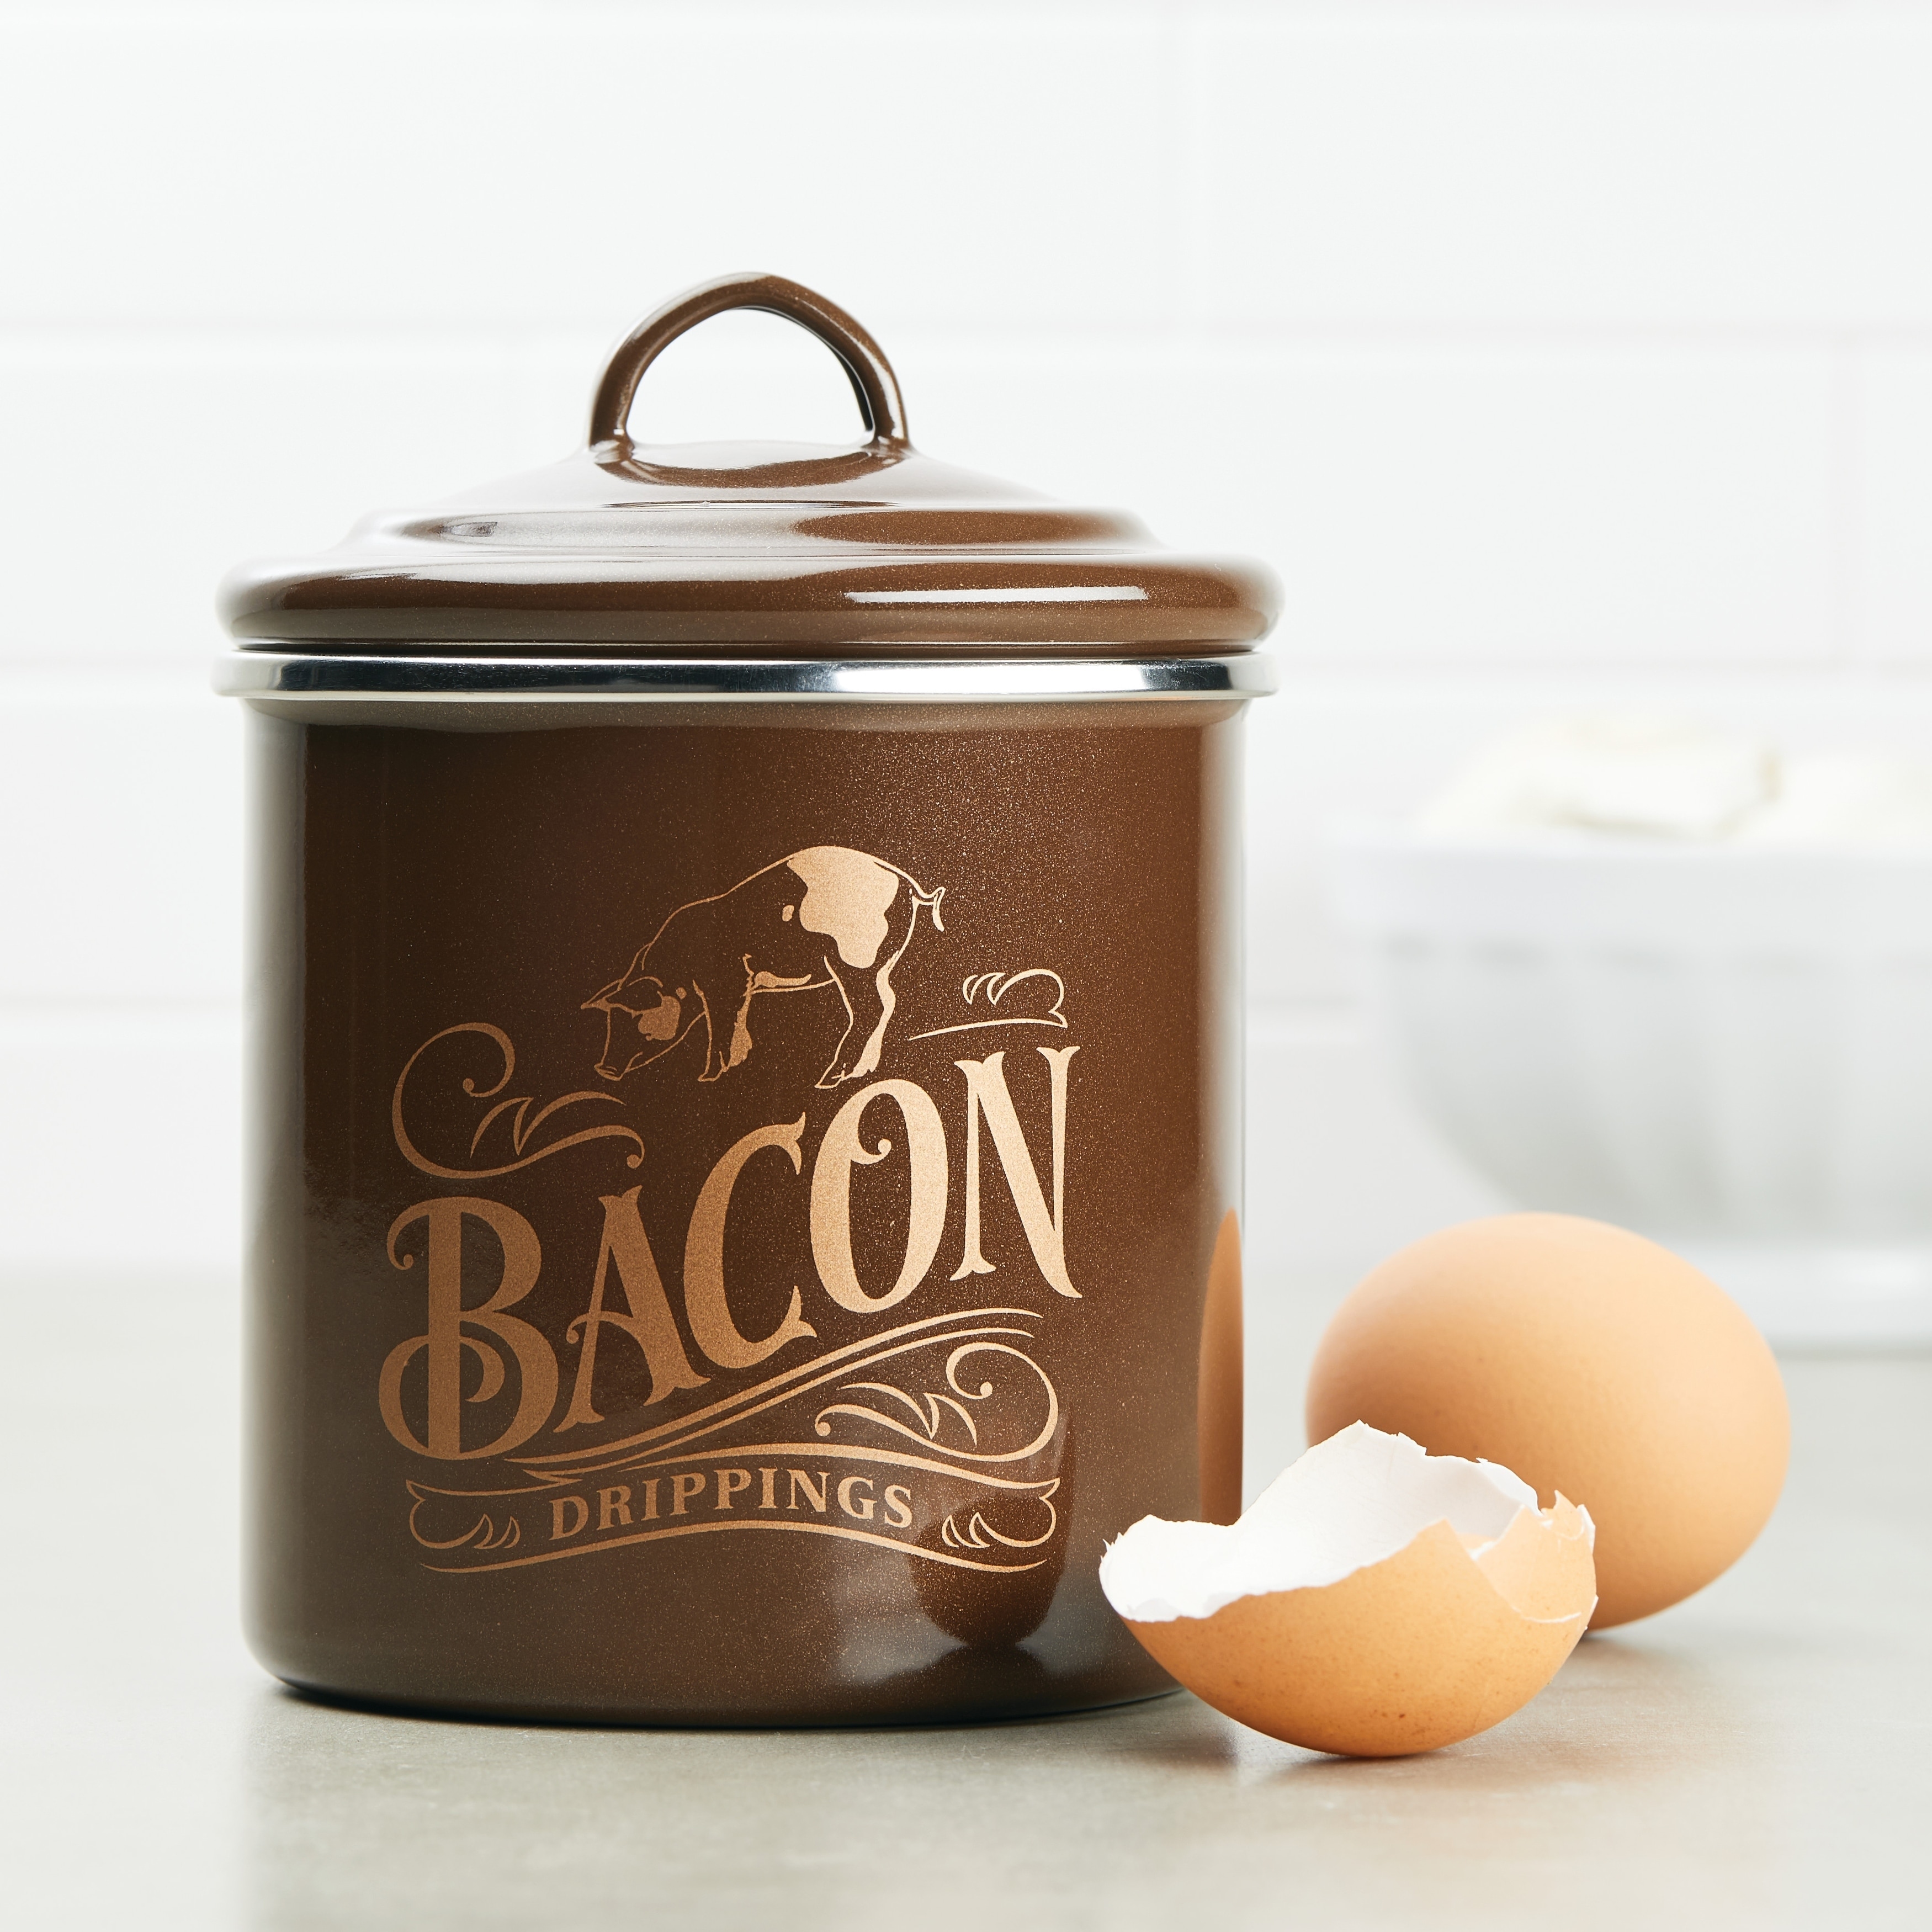 https://ak1.ostkcdn.com/images/products/23561958/Ayesha-Collection-Enamel-on-Steel-Bacon-Grease-Can-4-Inch-by-4-Inch-bac11a43-e275-4ad6-9c17-5b2295ff3f57.jpg